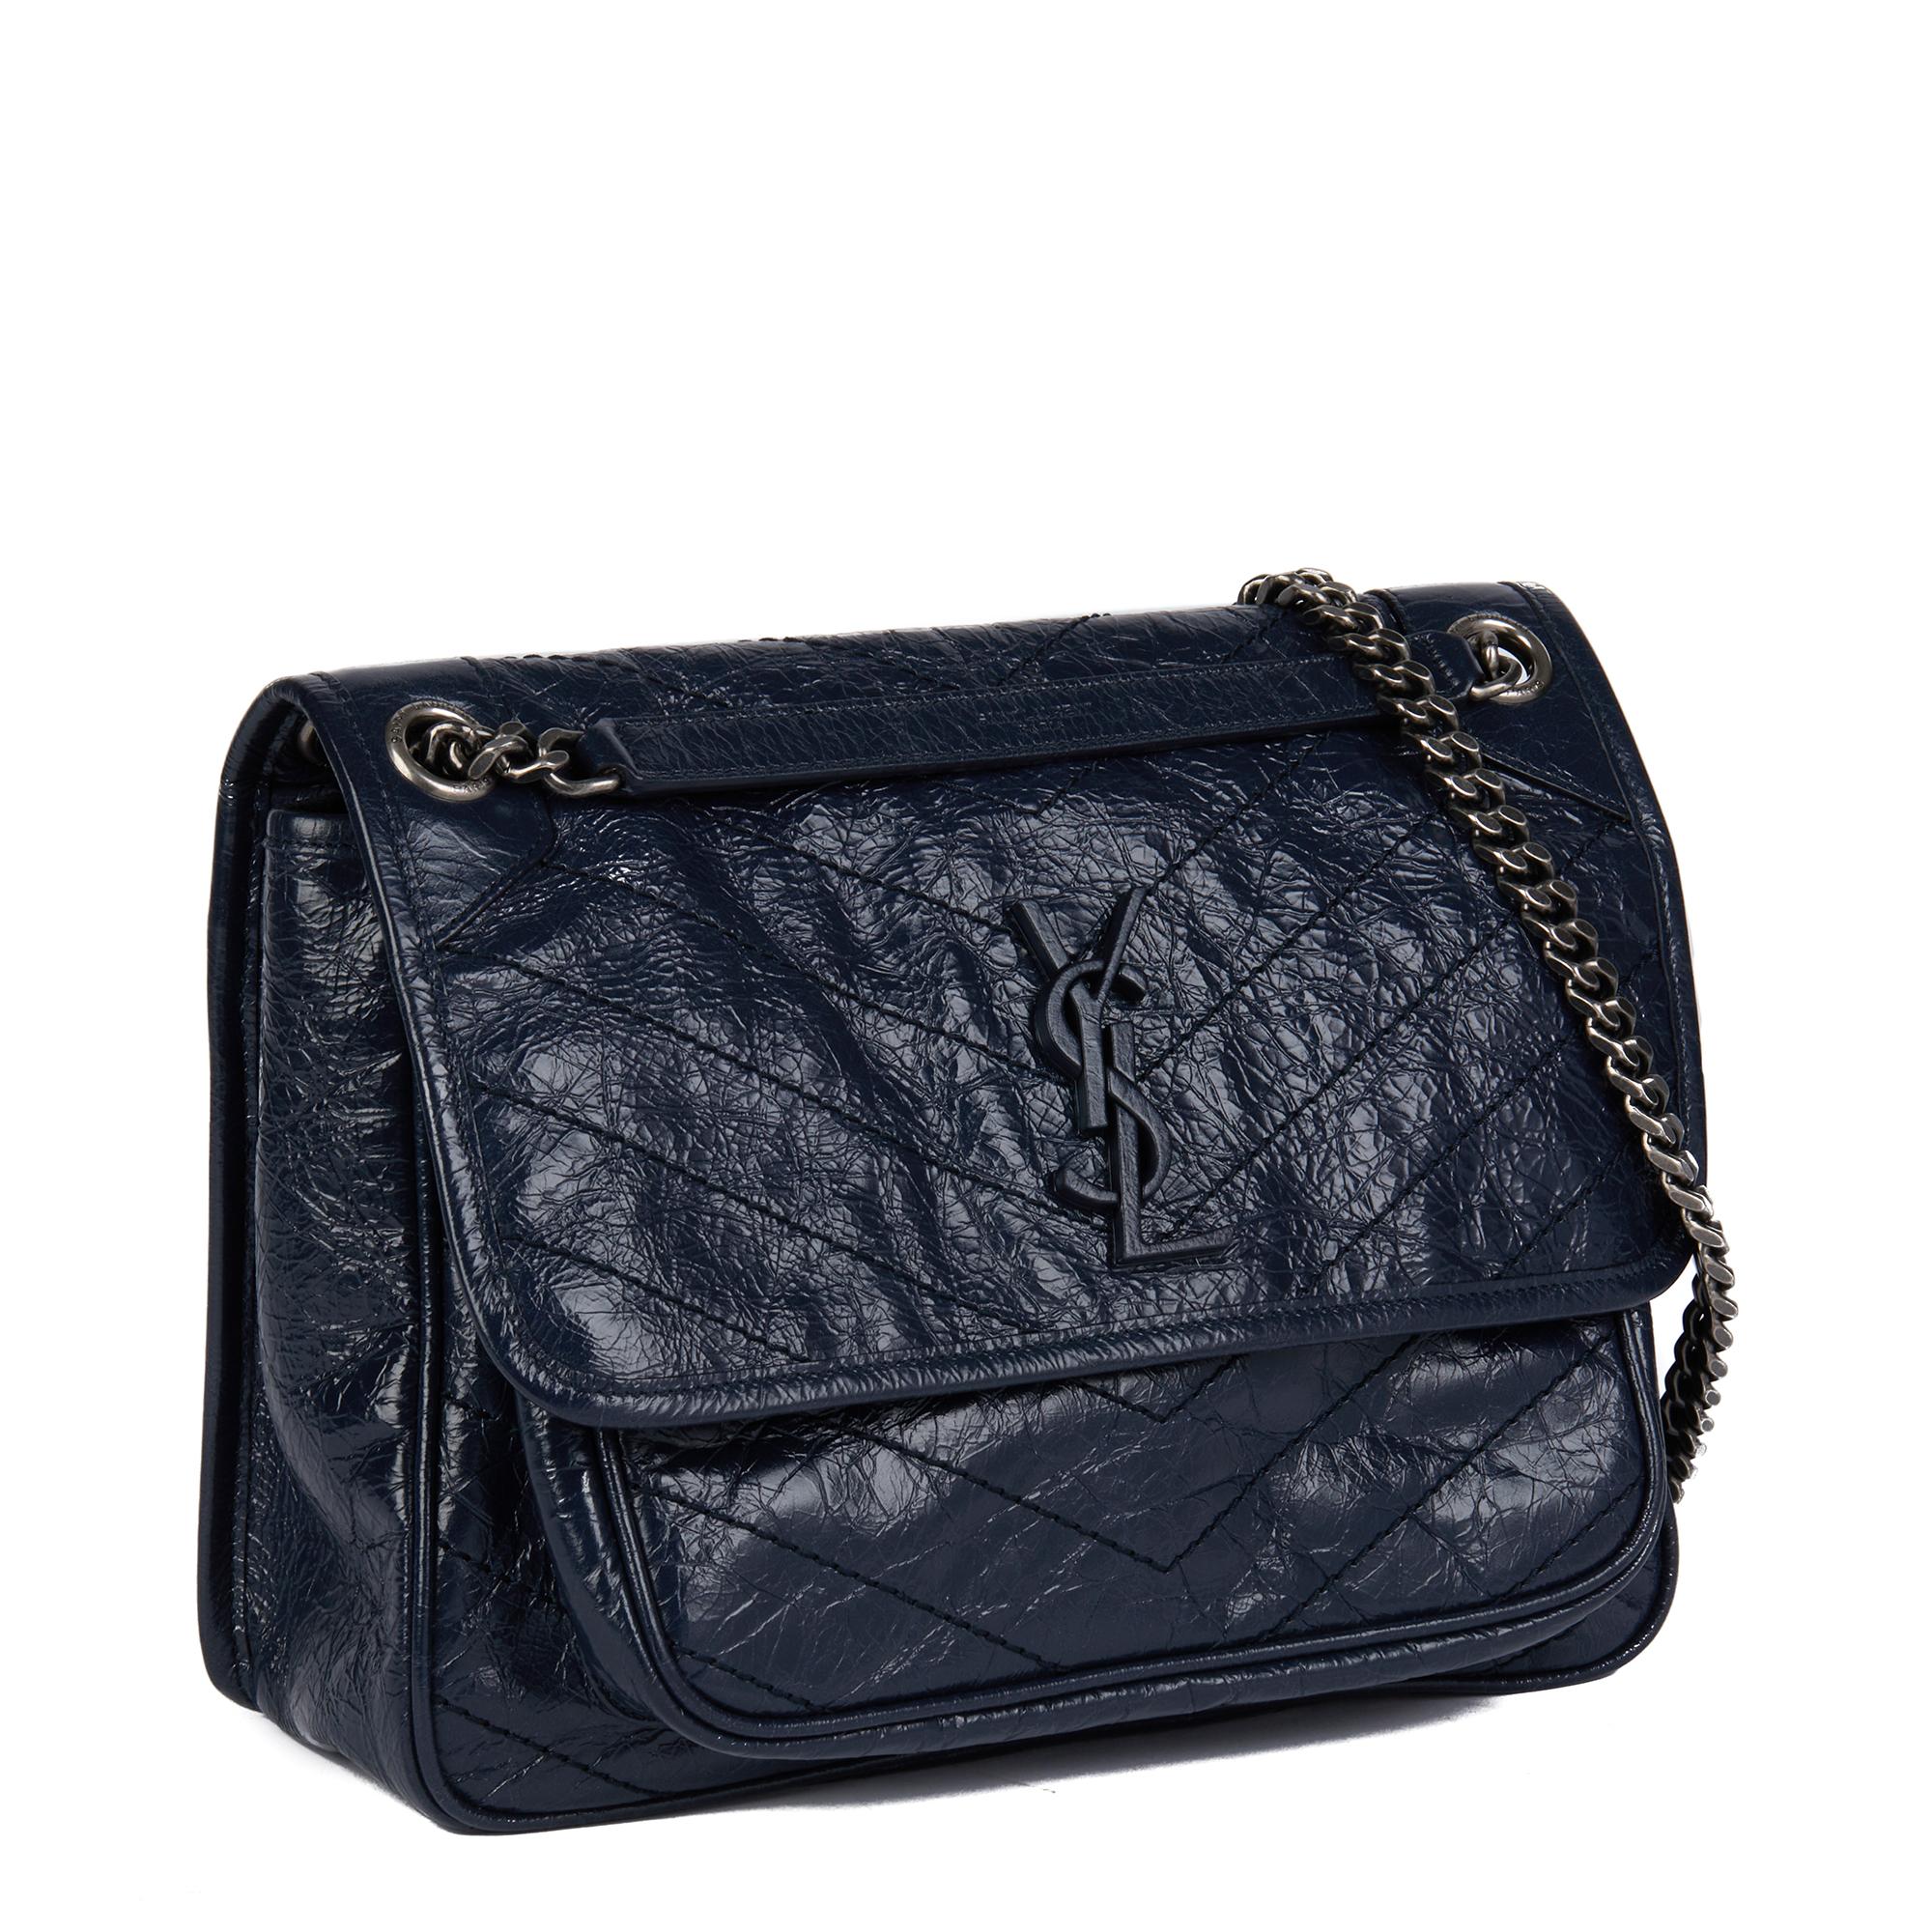 SAINT LAURENT
Deep Marine Chevron Quilted Crinkled Calfskin Leather Medium Niki

Xupes Reference: CB752
Serial Number: PMR498894-0718
Age (Circa): 2018
Accompanied By: Saint Laurent Dust Bag, Box, Tag, Care Booklet
Authenticity Details: Serial Stamp